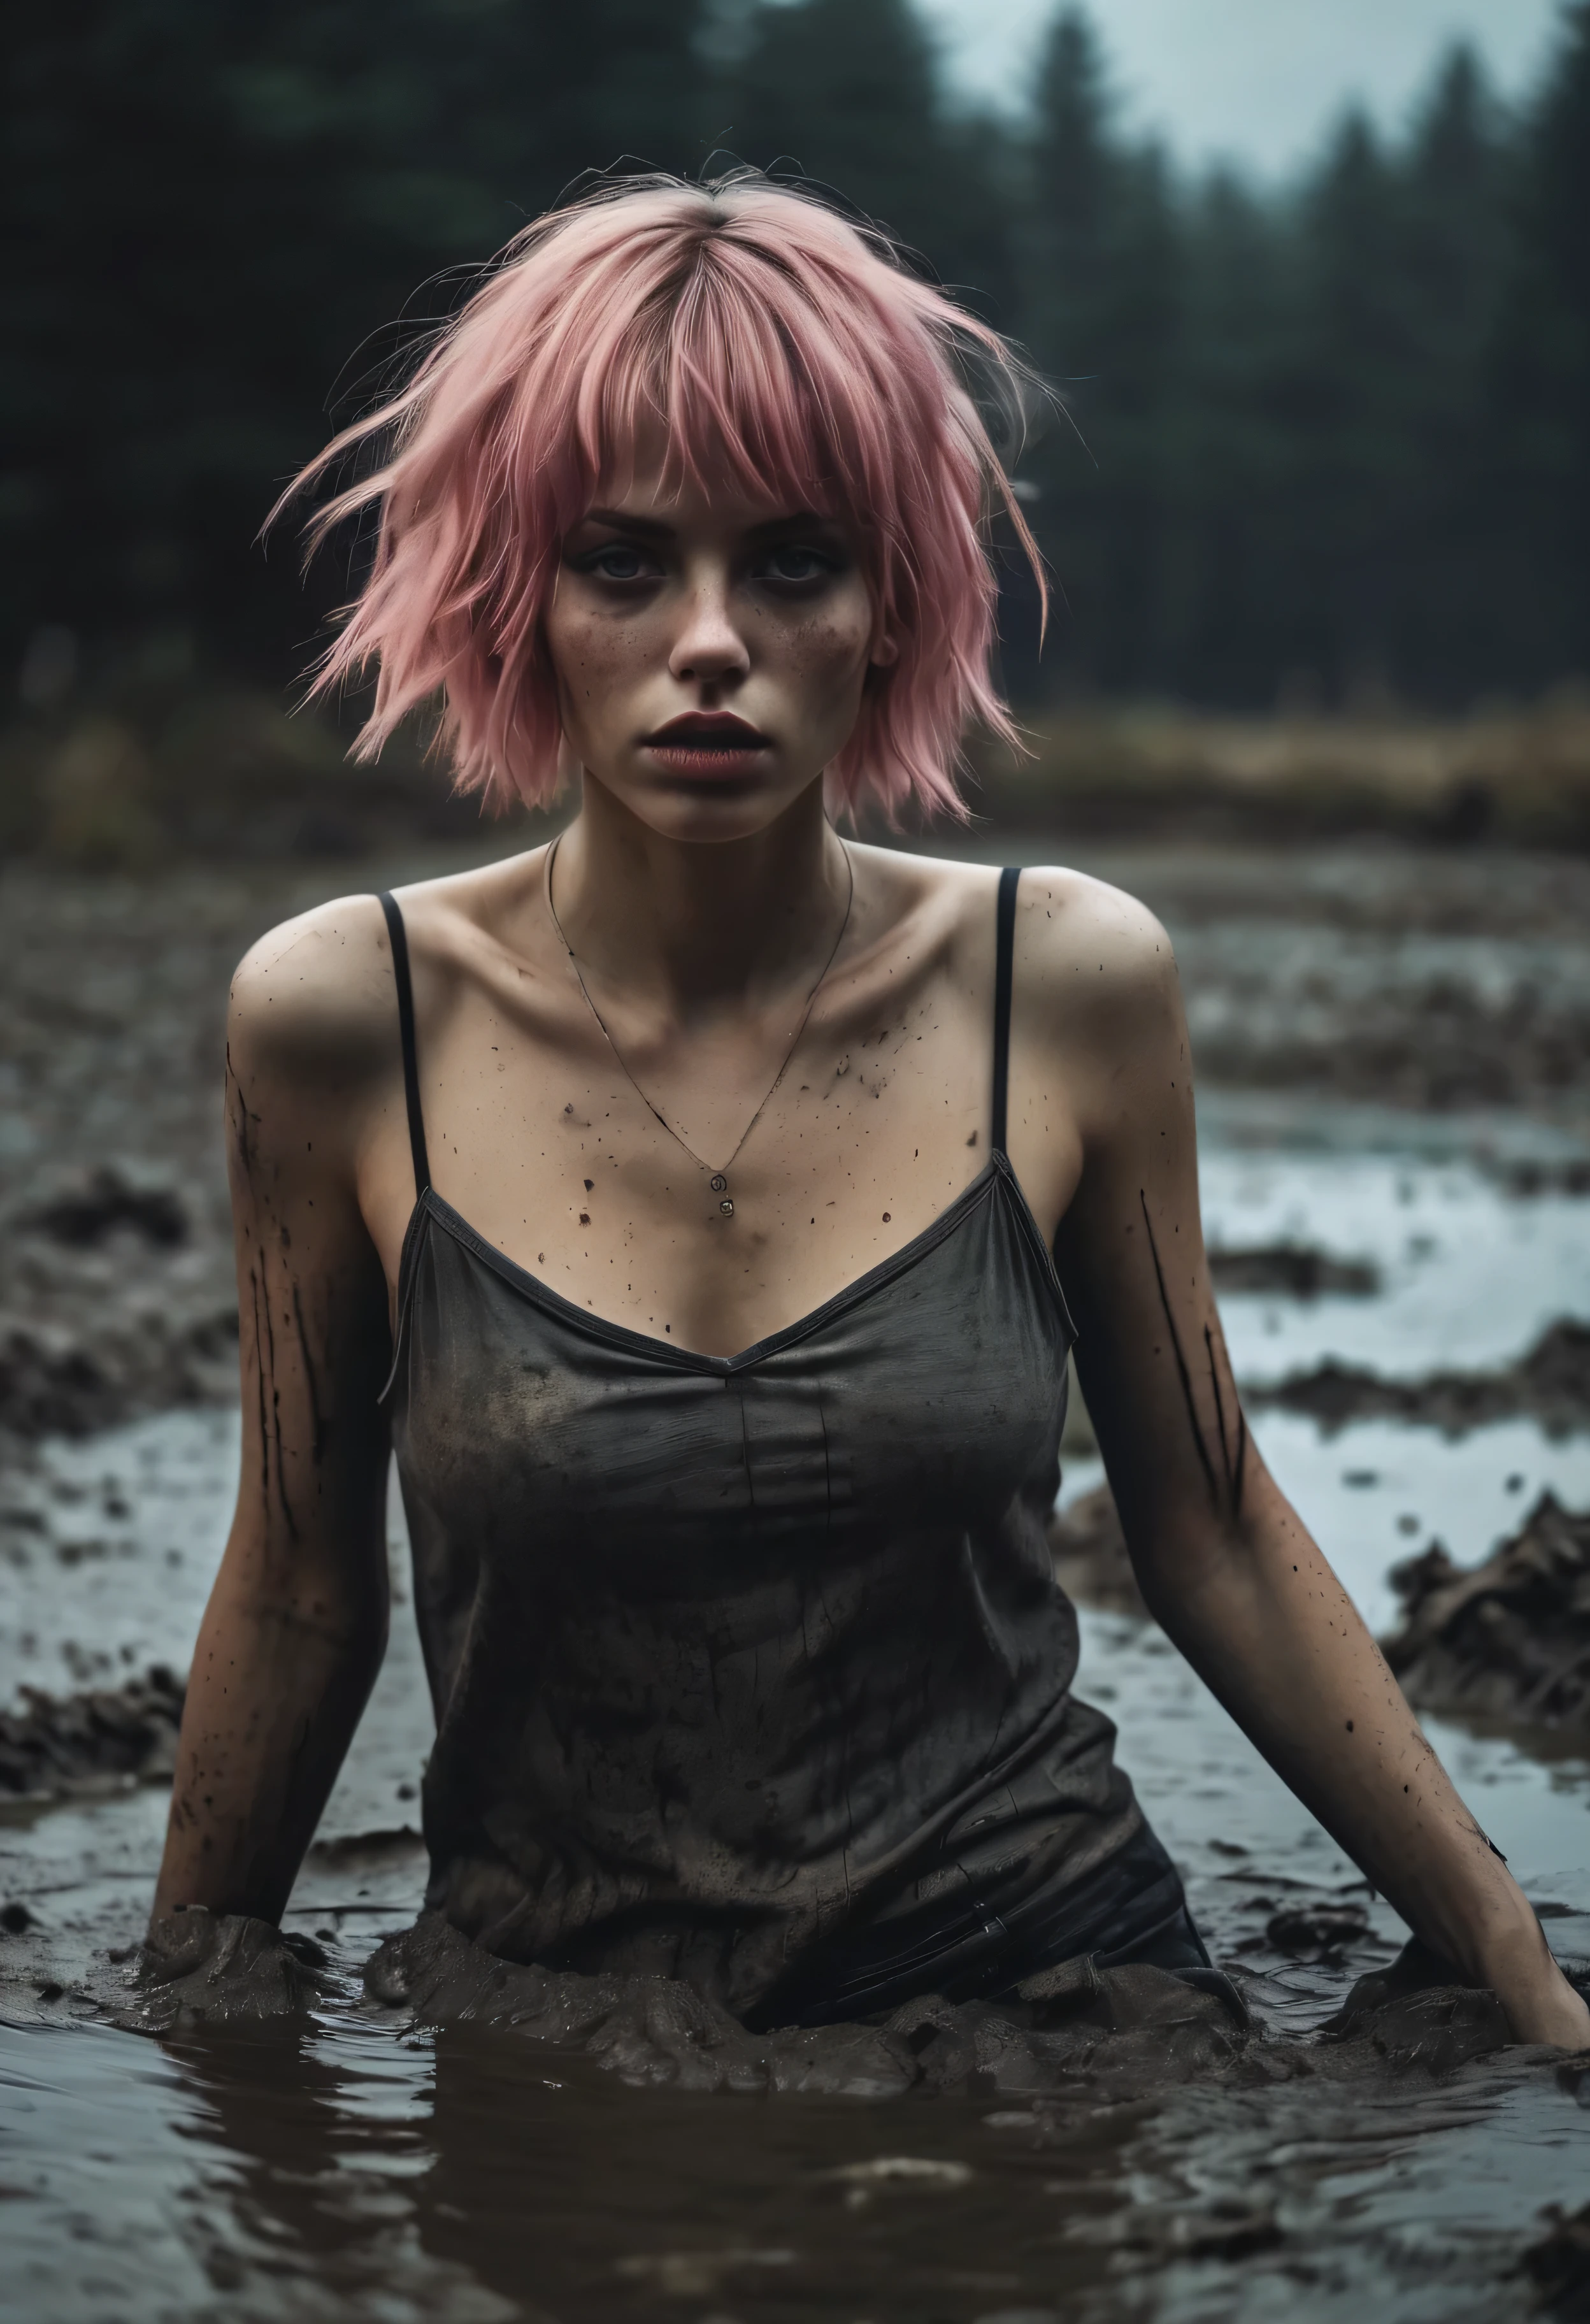 (Best Quality,hight resolution,Masterpiece, Overhead view:1.20),Ultra-detailed,The woman,Wide flares on jeans,sickly,drowning in a swamp, (grimly capitulates at the bottom of the mud pit:1.2),gloomy ecstasy,fetish,dark gloomy atmosphere,gritty texture,Retro-atmosphere,warped reality,melancholic expression on his face,mysterious aura,foggy atmosphere,foggy background,Subtle color palette,provocative pose,Strong emotions,Coming Out of the Depths of Despair,Piercing gaze,intense shadows,Plunged in Darkness,Rugged terrain,ominous vibe,A supernatural sensation,Loss of Place in Time and Space,Eerie silence.asymmetrical bangs, freckles, pink short hair, Bangs, freckles, gray eyes,